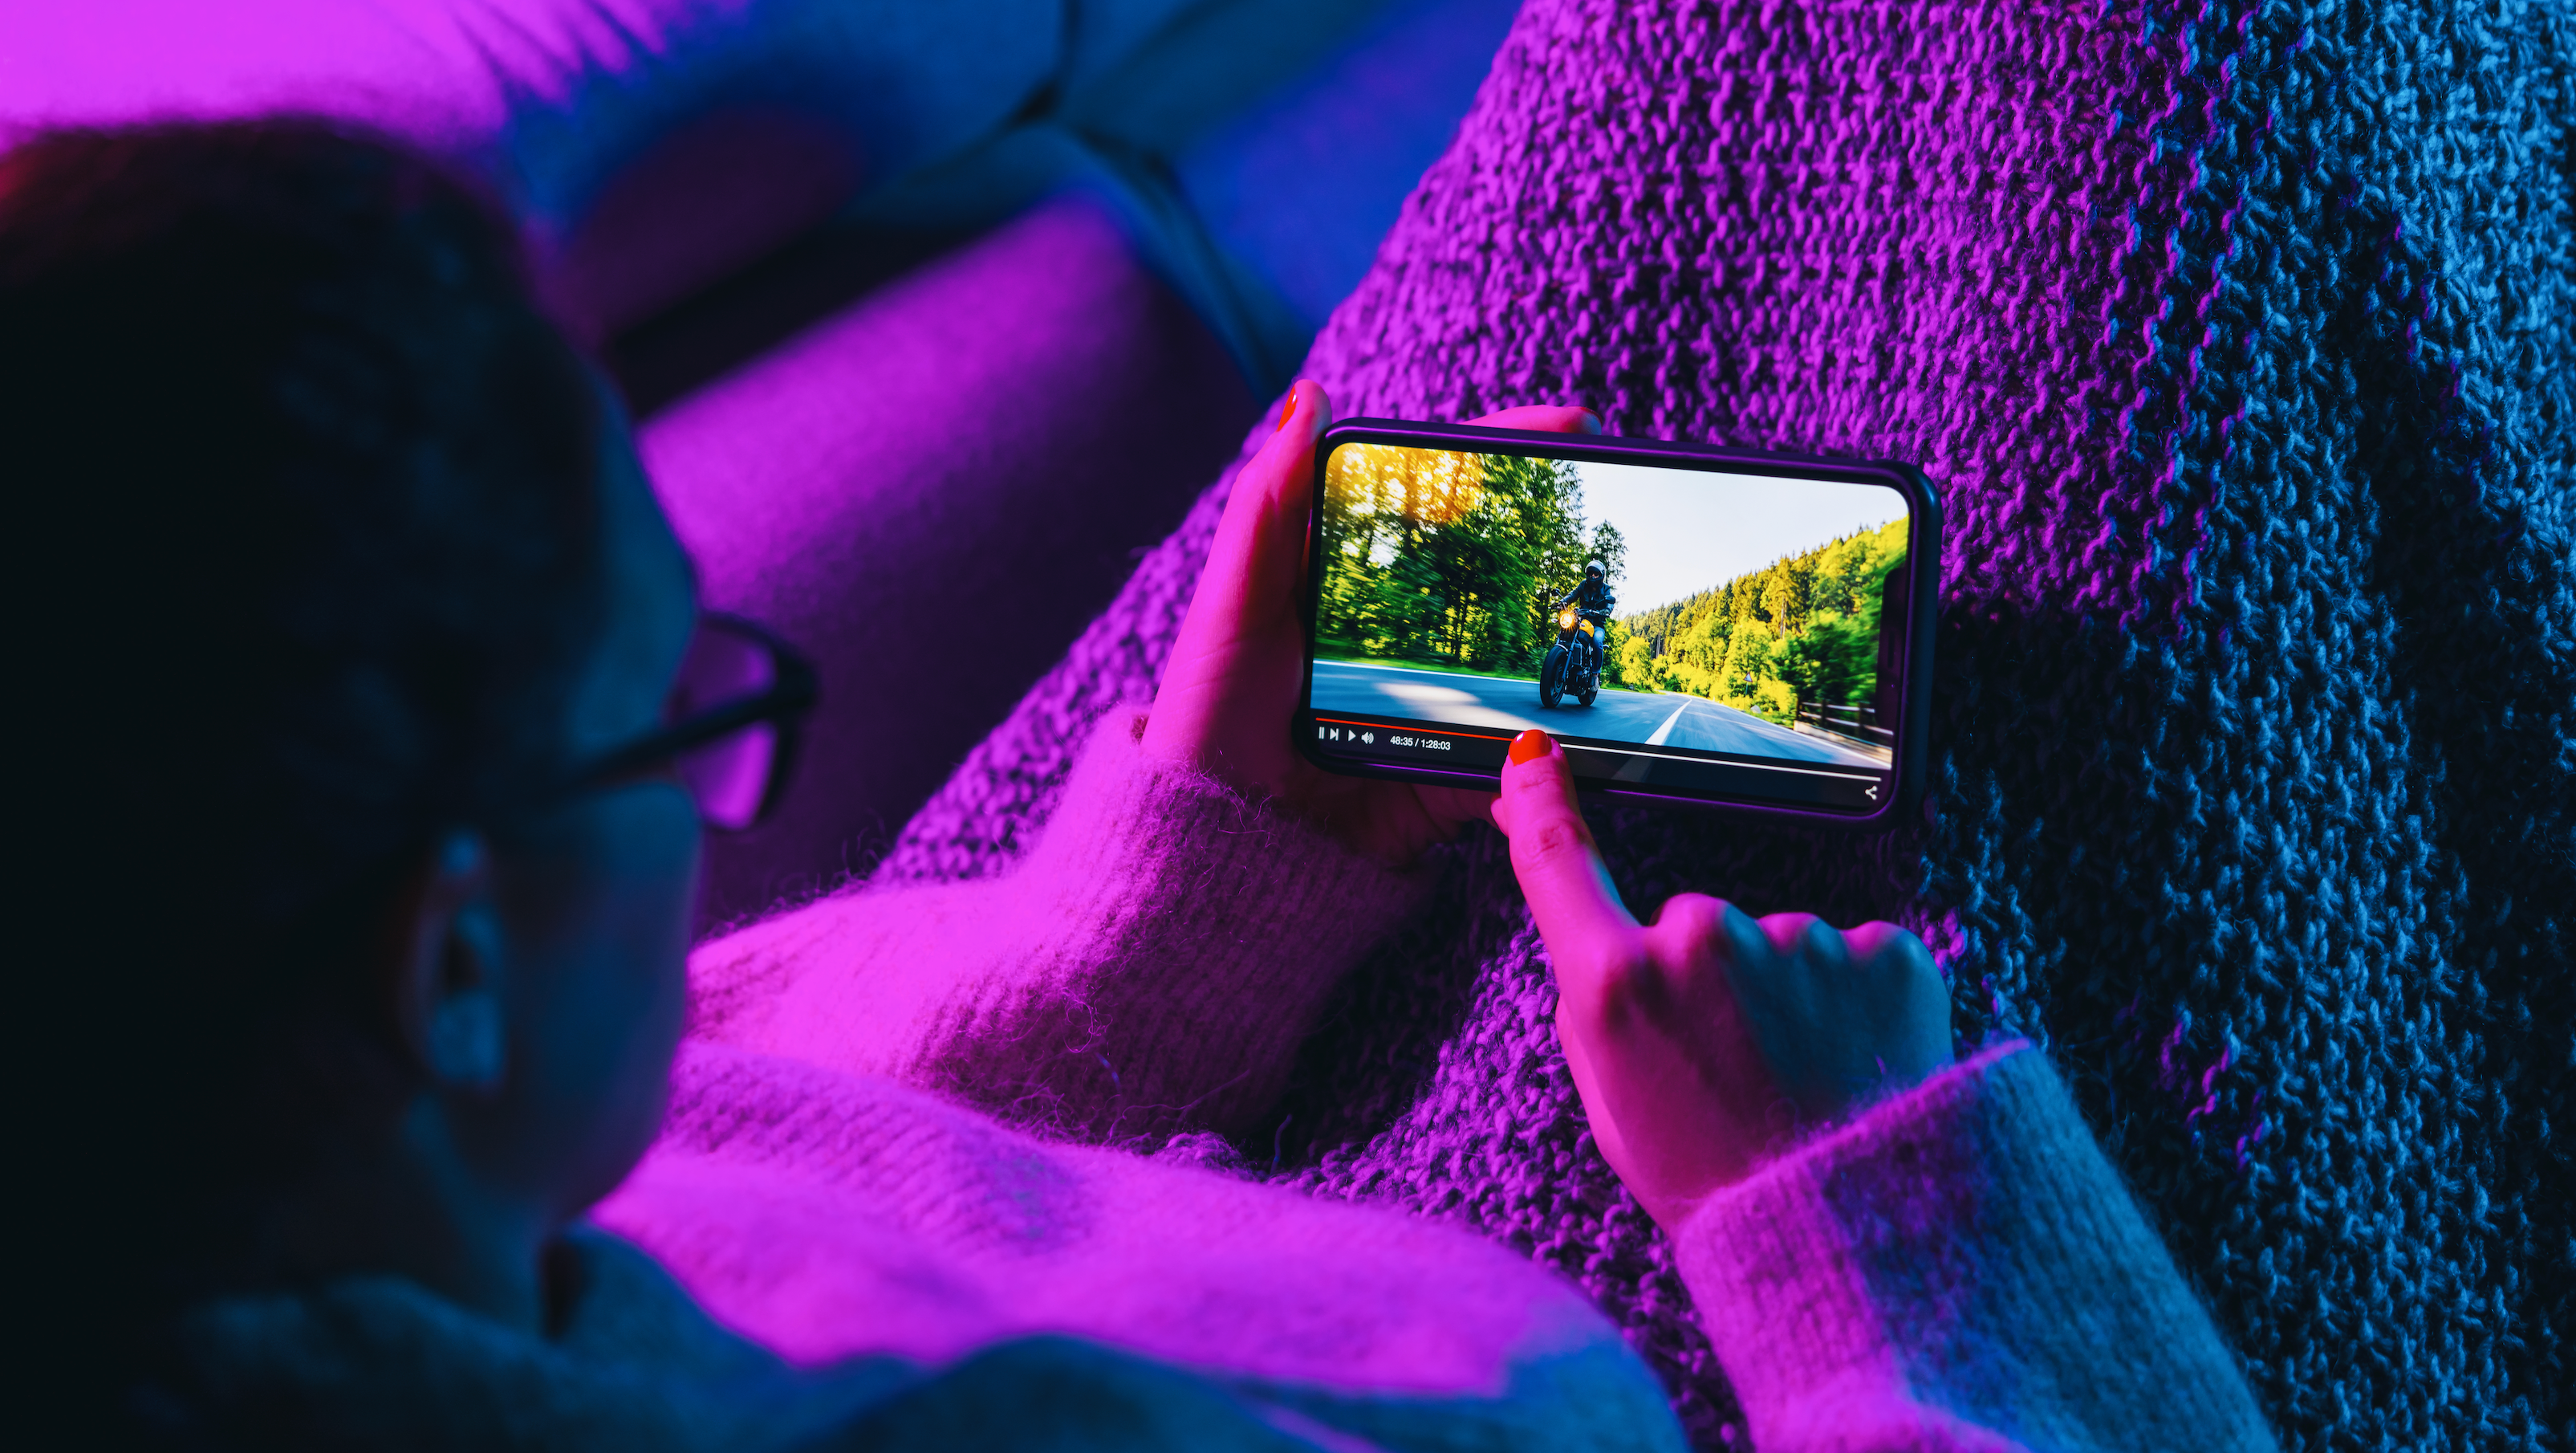 under a purple light a person with glasses streams a video on their mobile device while sitting on the couch with a blanket